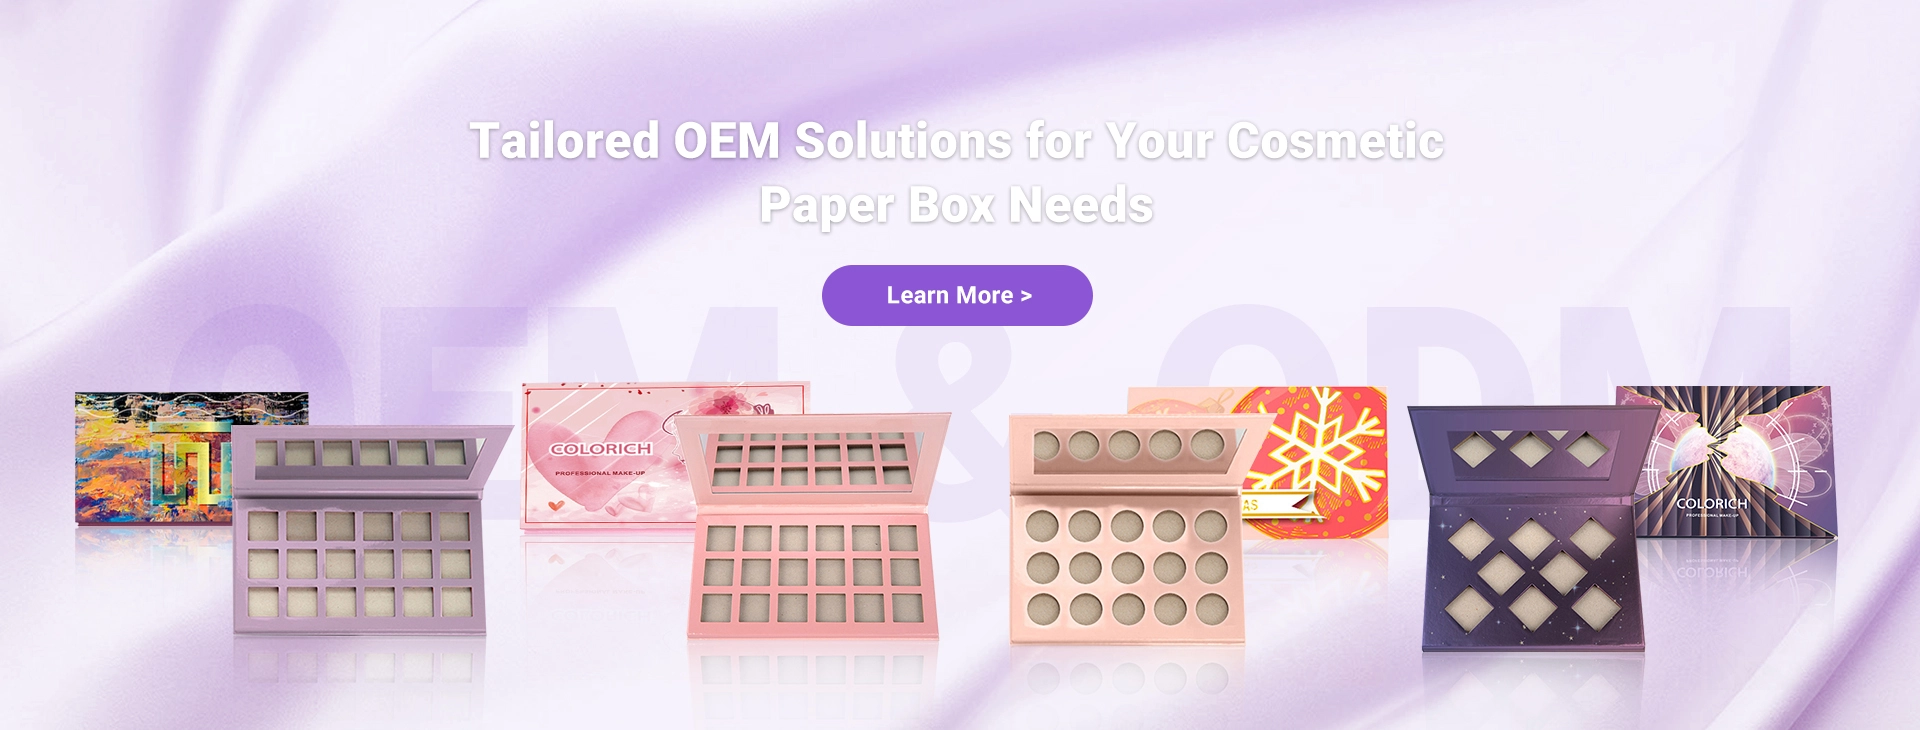 Tailored OEM Solutions for Your Cosmetic Paper Box Needs